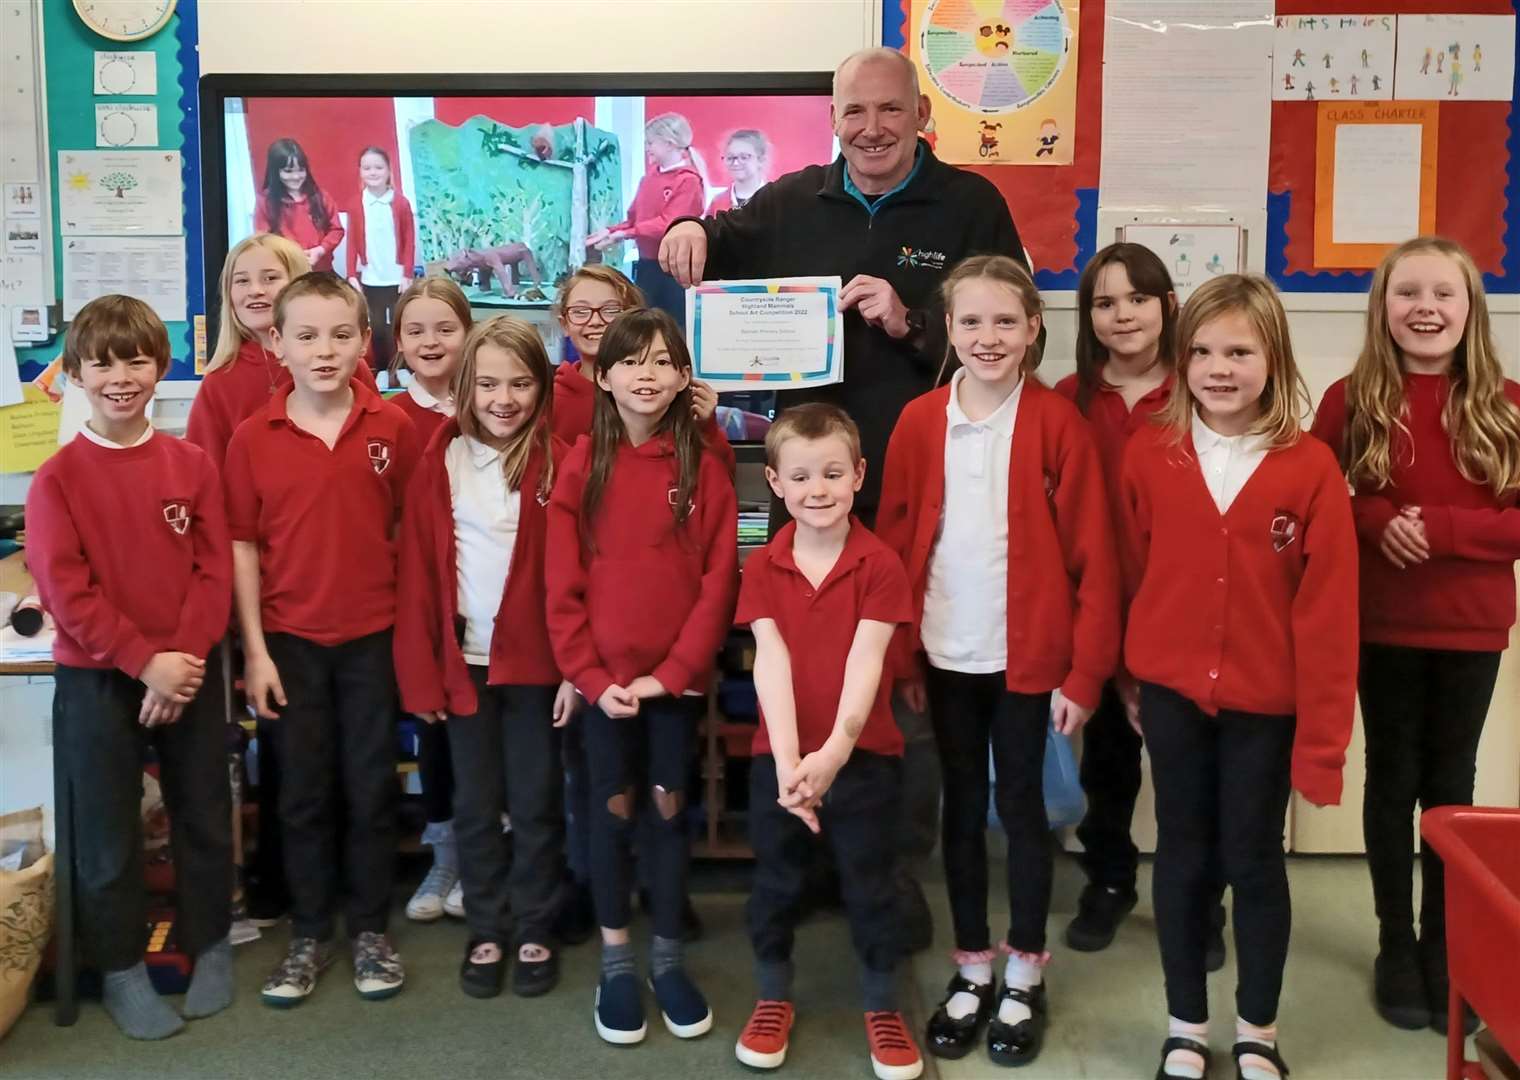 Pupils at Balnain Primary School receive their winning certificate from High Life Highland ranger John Orr. Picture: Andy Summers/HLH